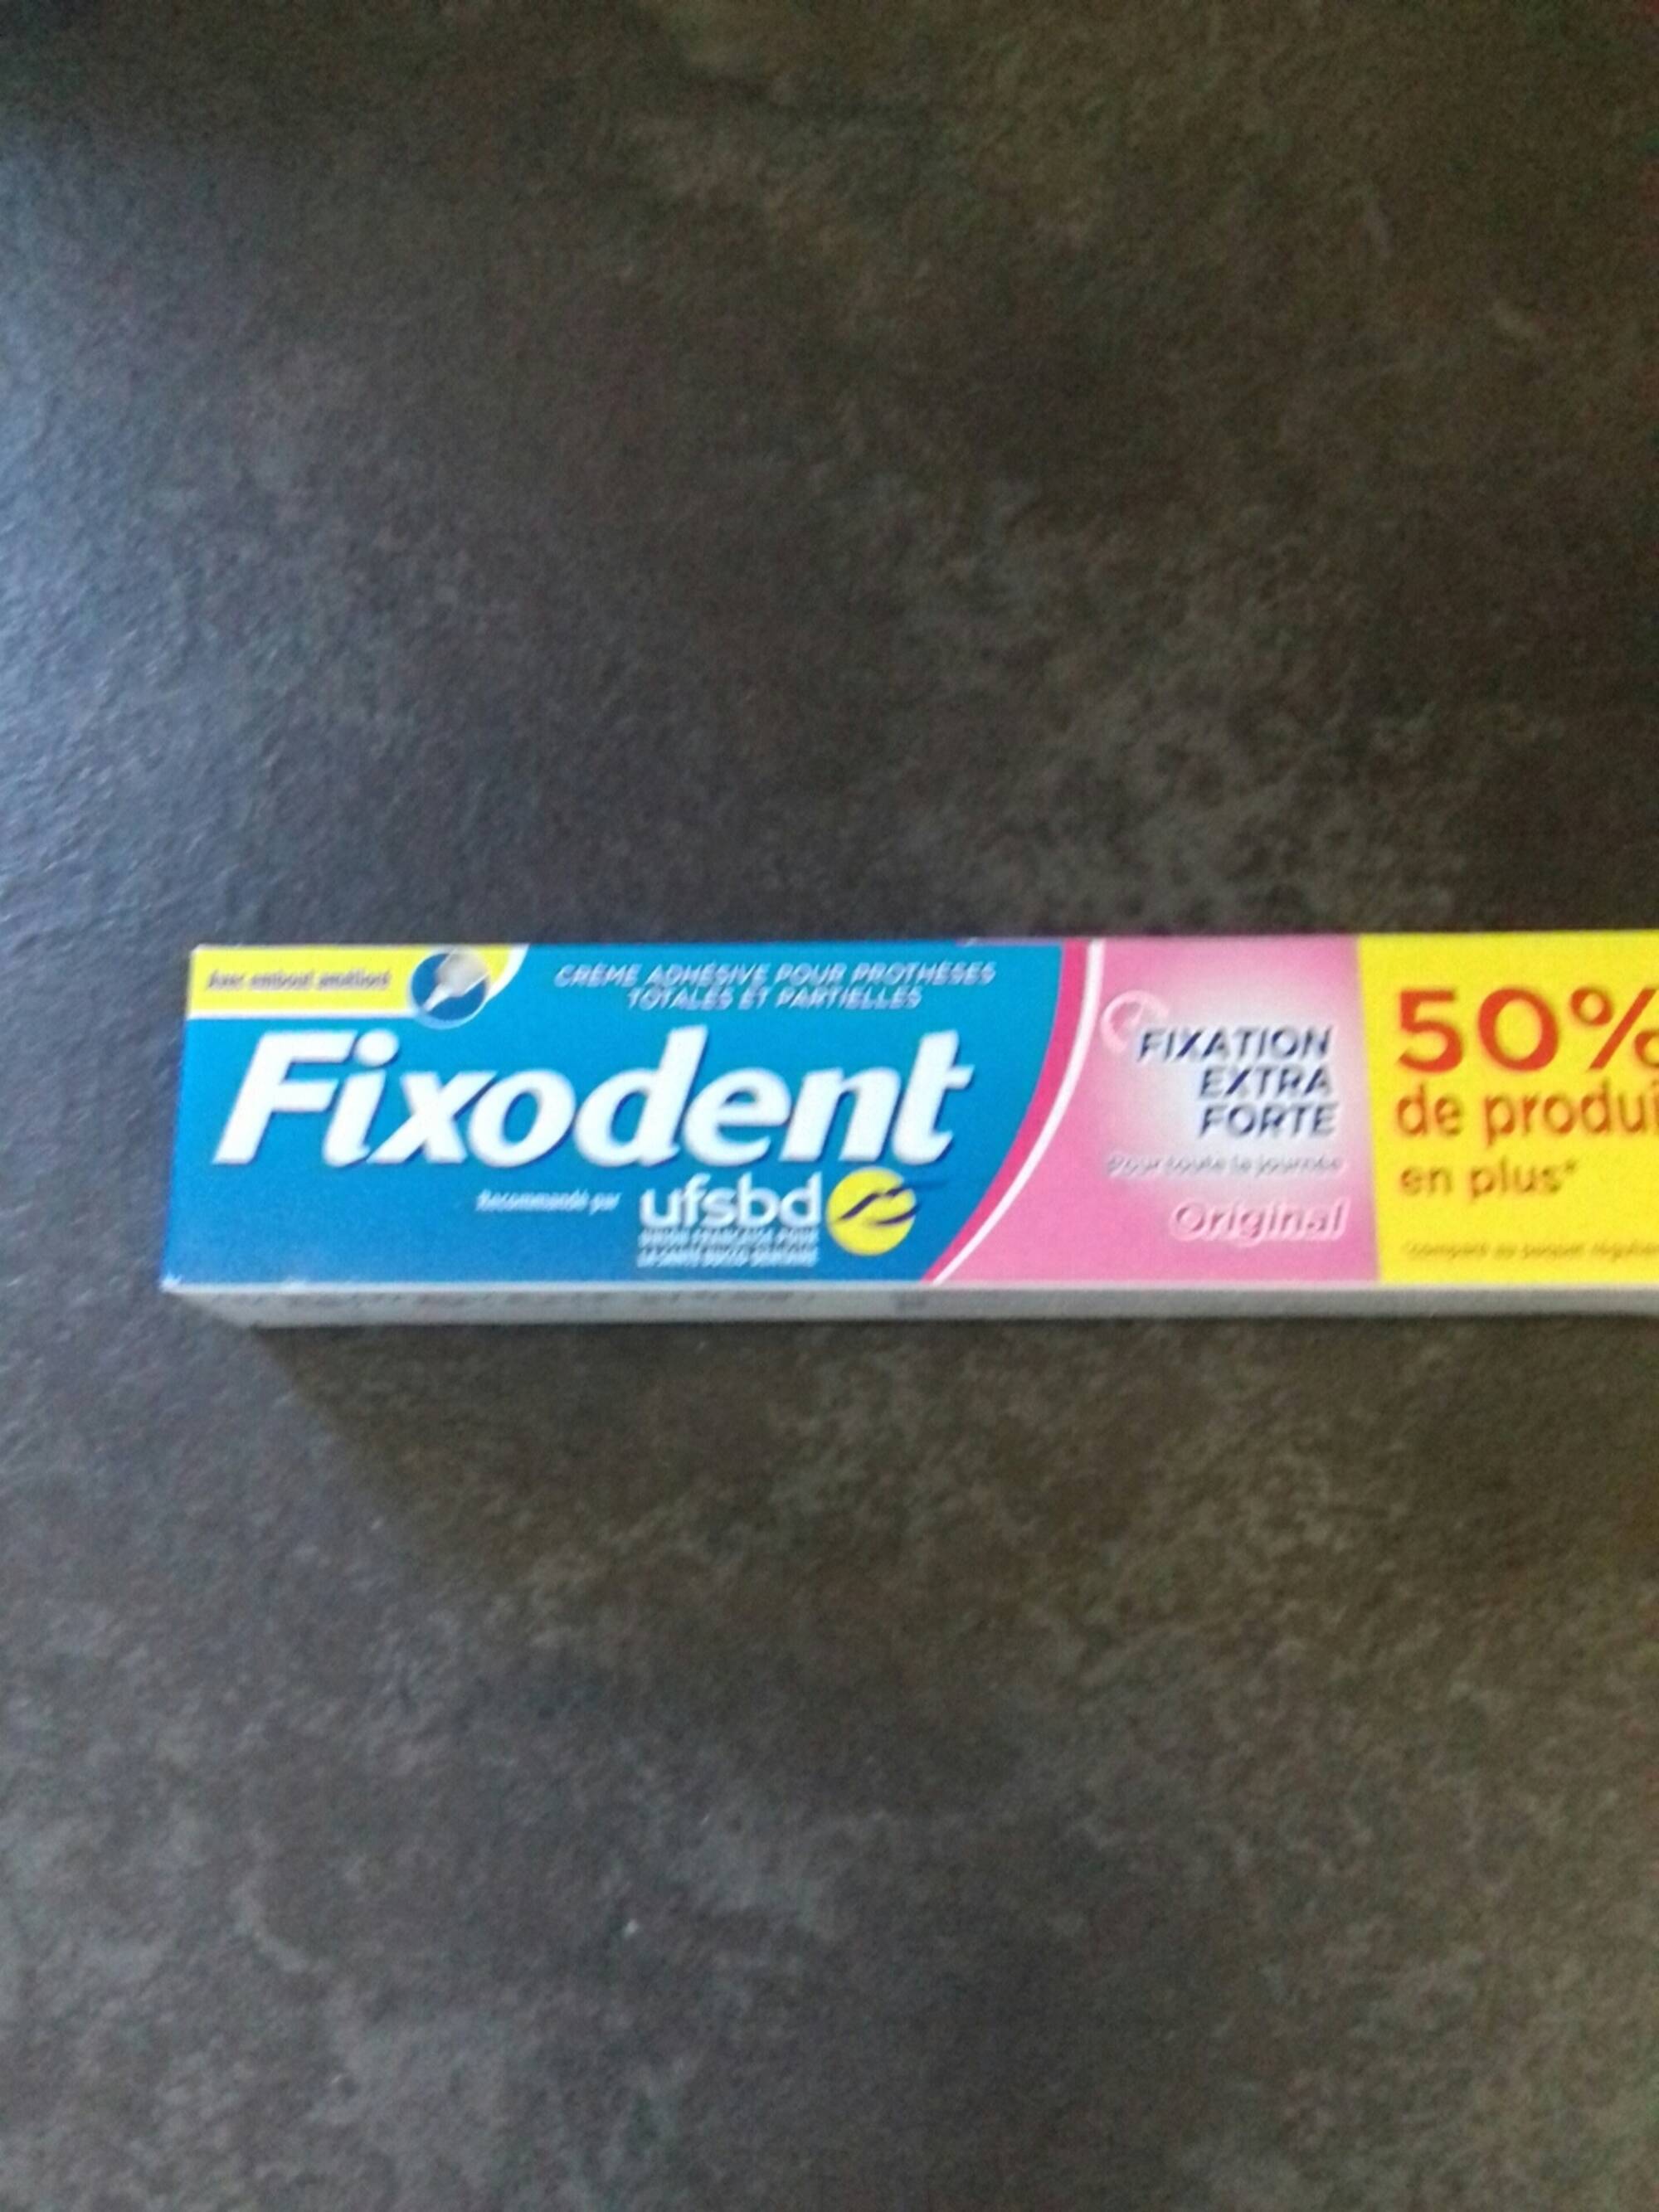 Composition FIXODENT Fixation extra forte - Dentifrice - UFC-Que